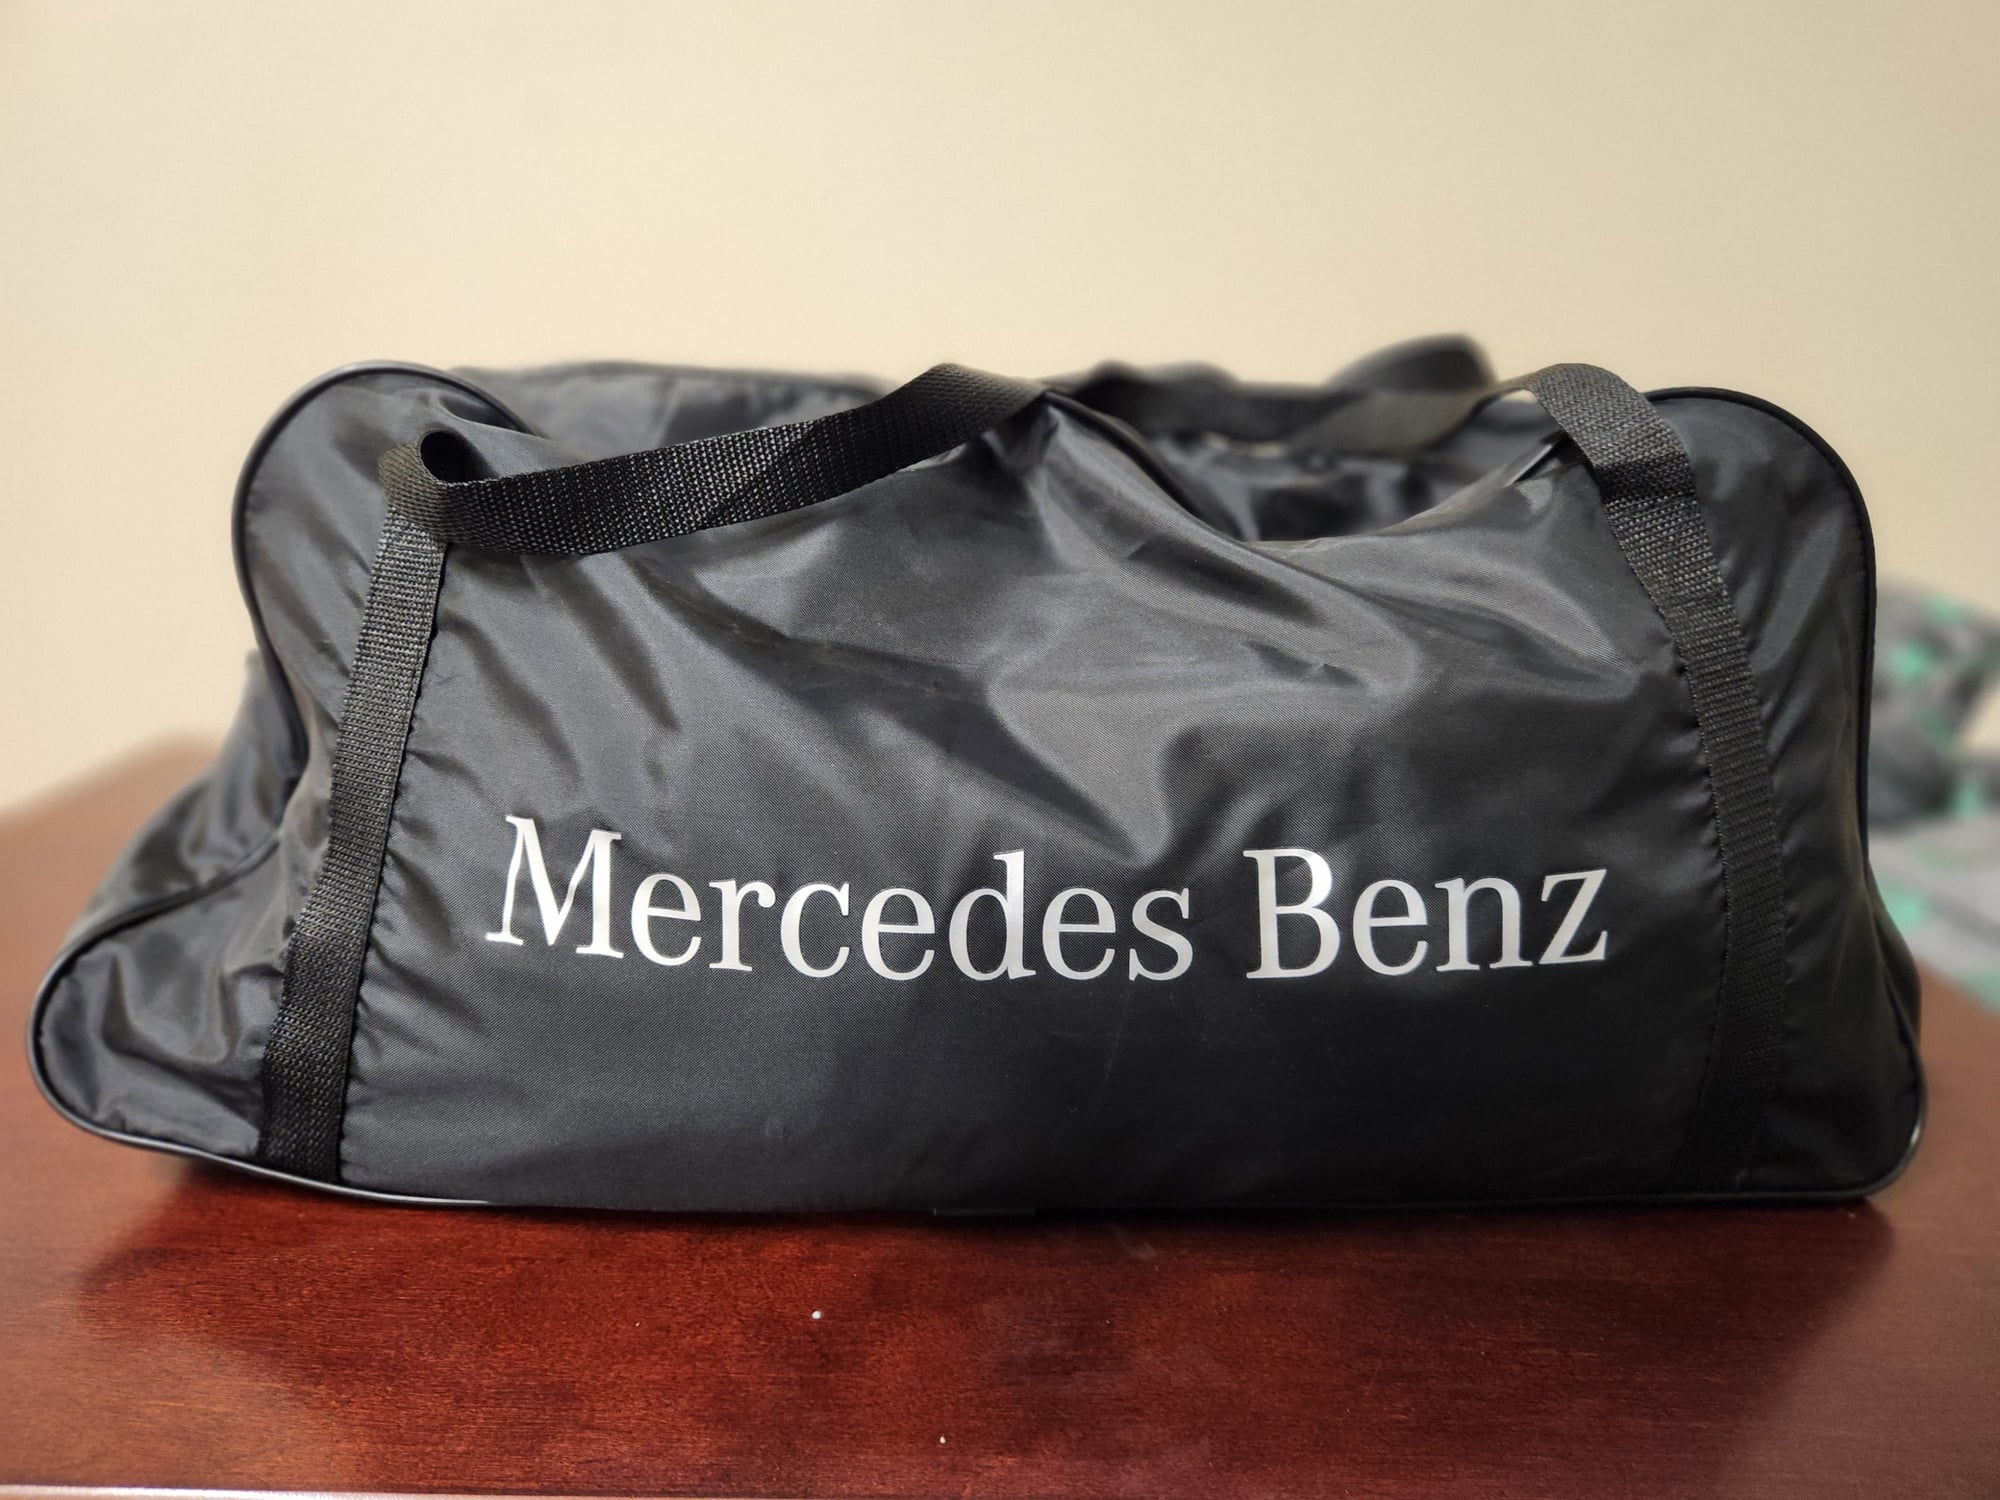 Miscellaneous - AMG car cover FOR SALE!!! - Used - 2018 to 2021 Mercedes-Benz C63 AMG S - 2018 to 2021 Mercedes-Benz C63 AMG - Fresno, CA 93730, United States